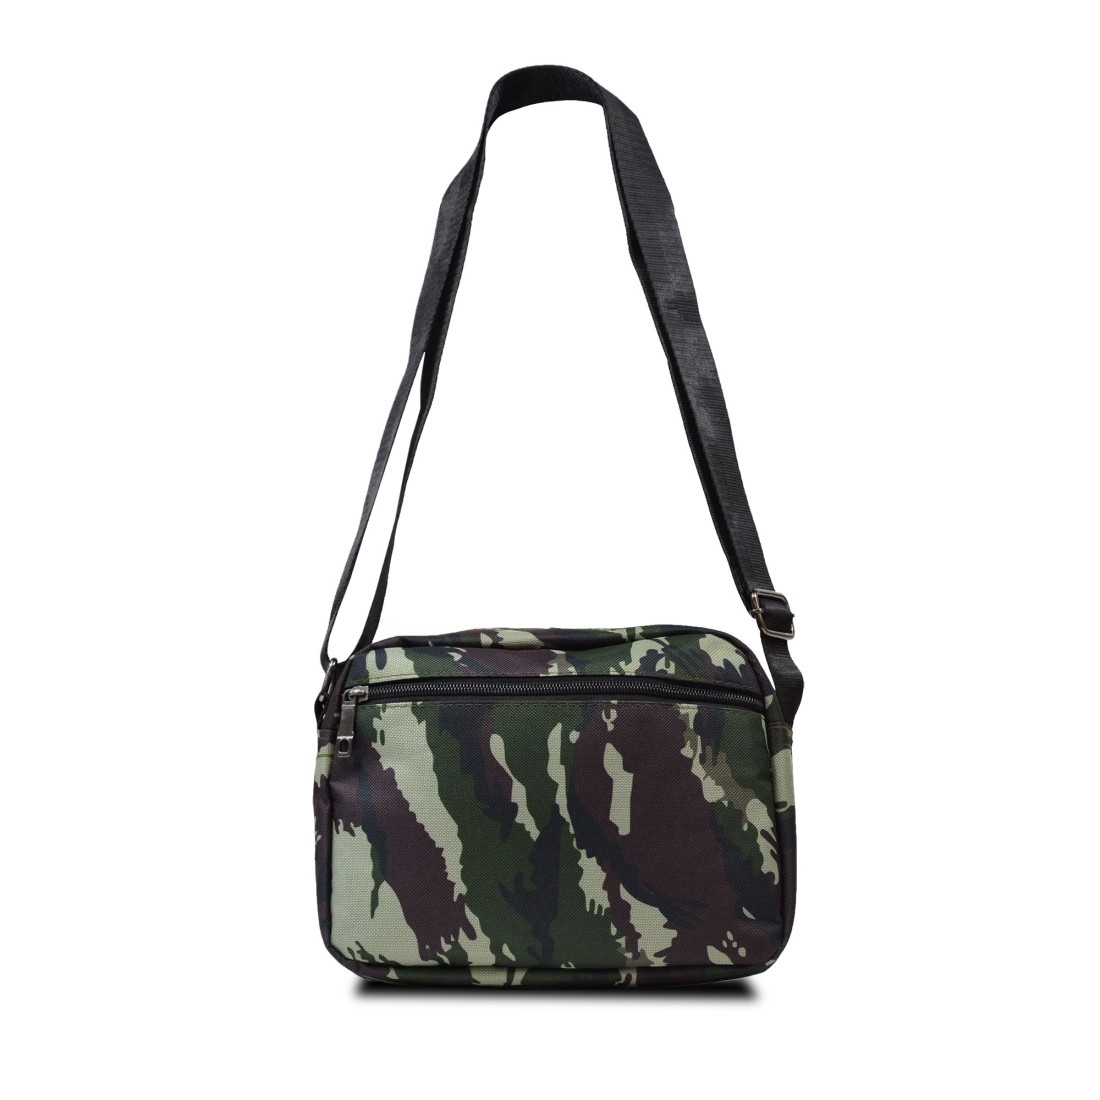 Sacoche Reporter Homme Textile Camouflage